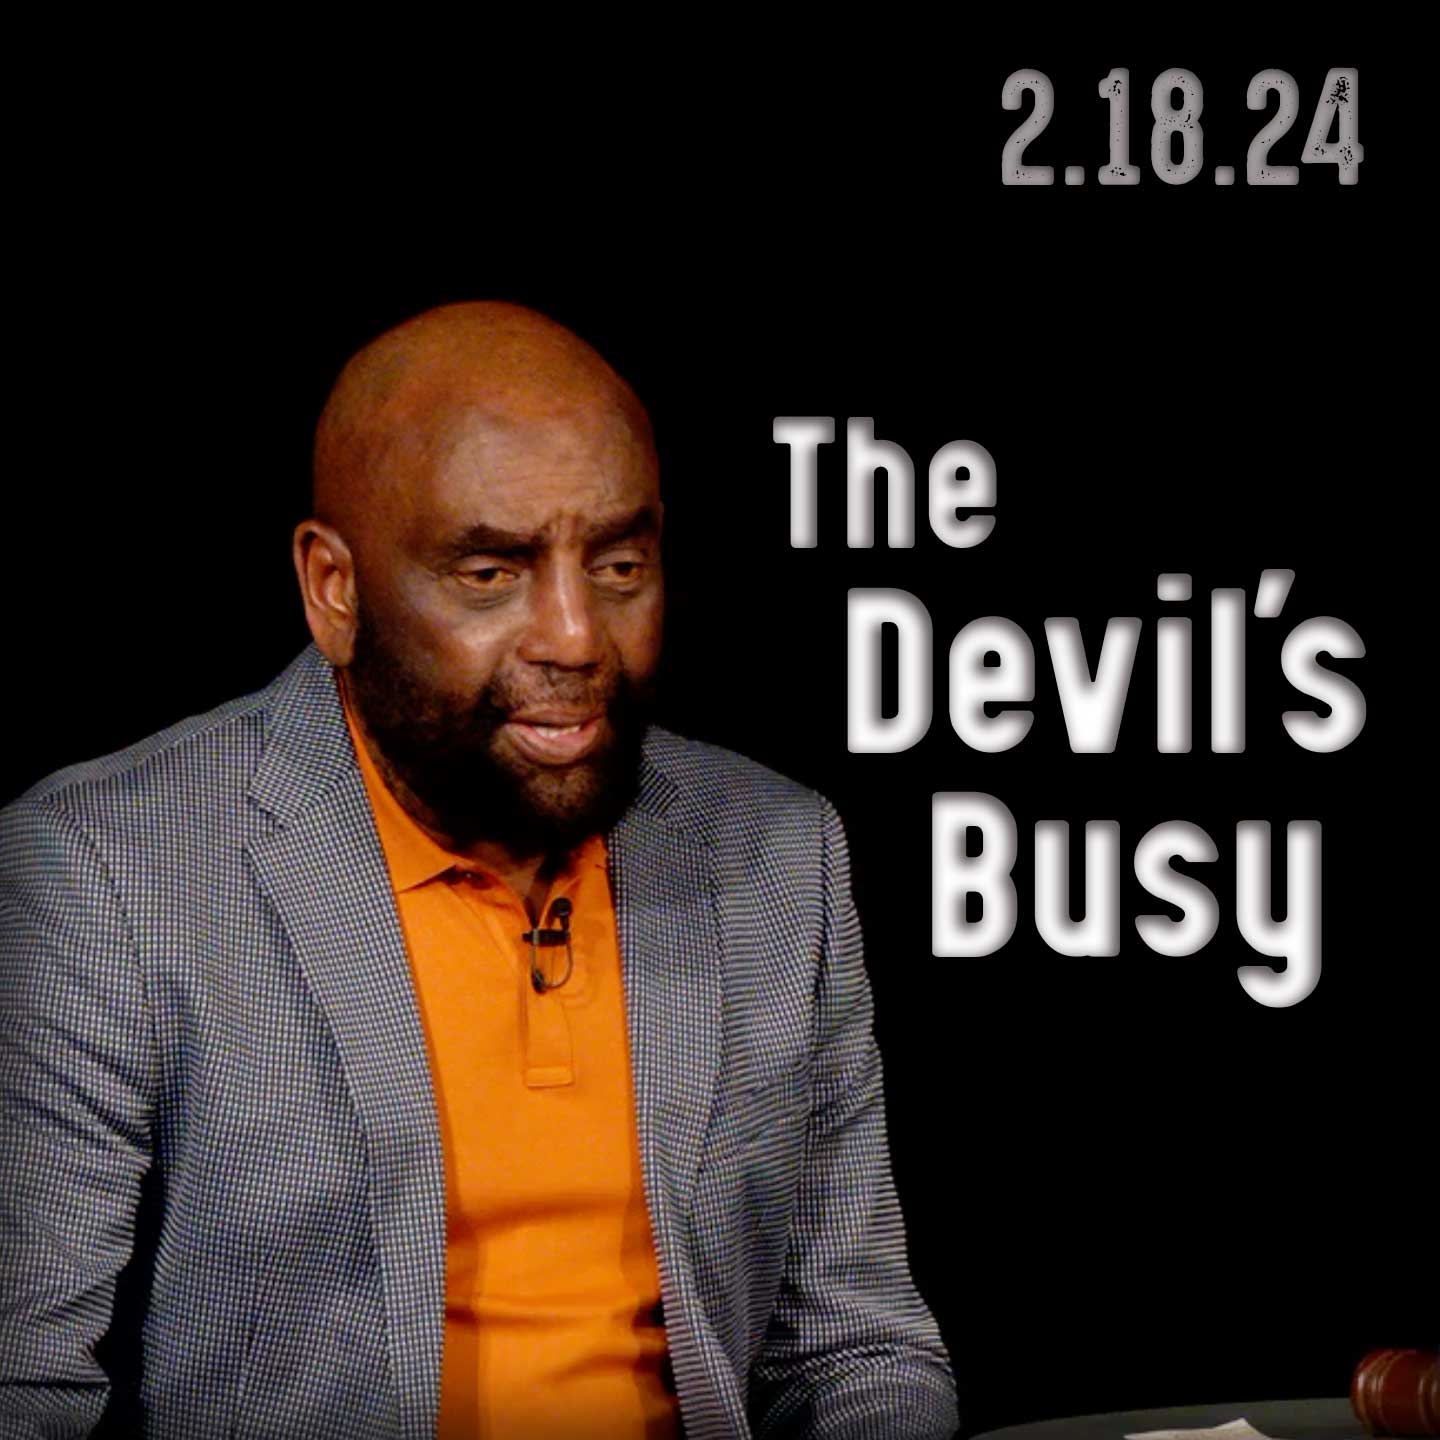 You Are Not a Sinner | Church 2/18/24 (The Devil gets busy)